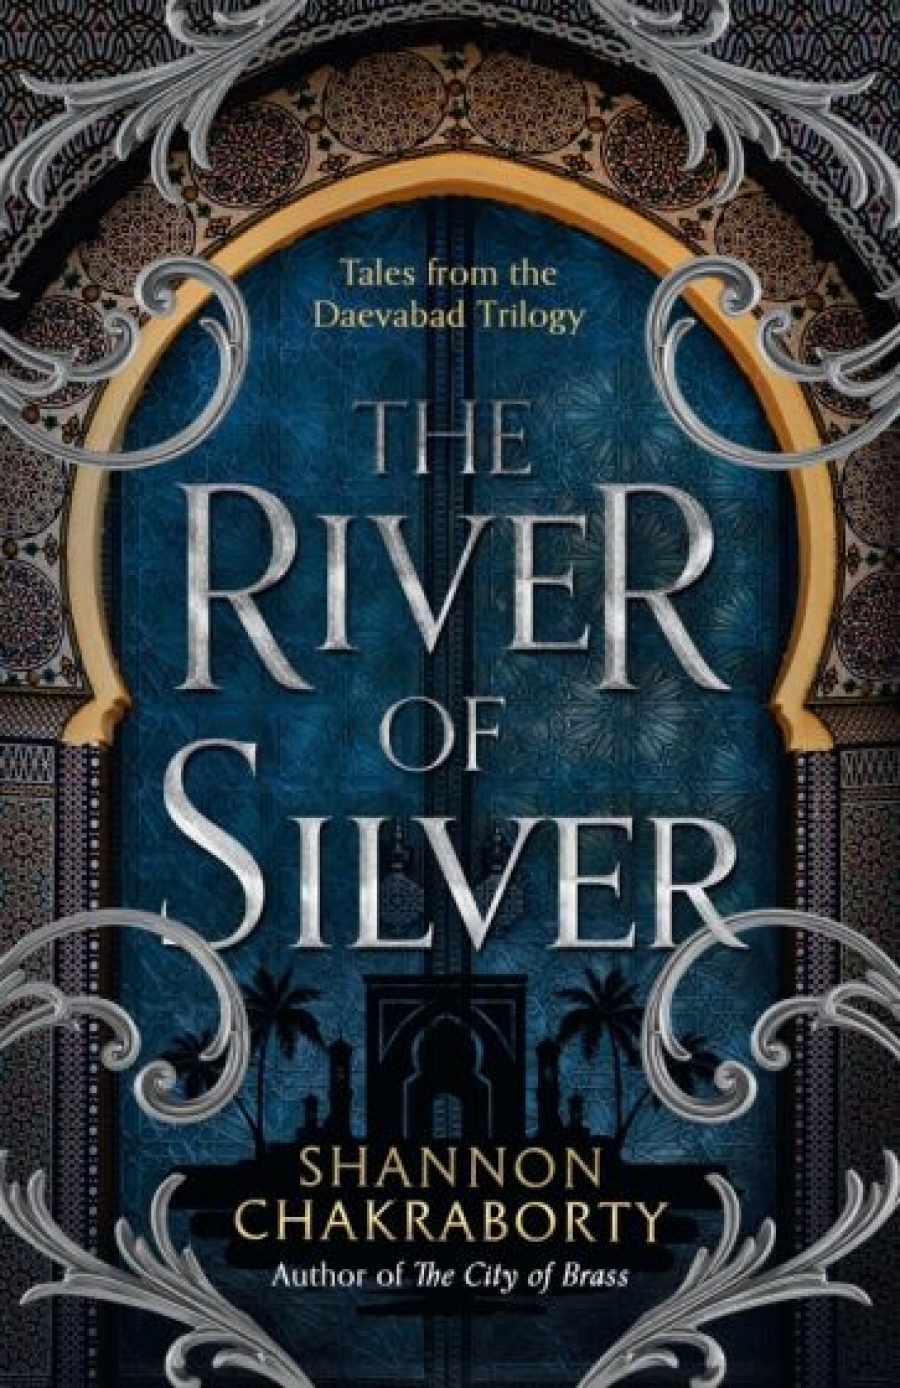 Chakraborty Shannon The River of Silver. Tales from the Daevabad Trilogy 